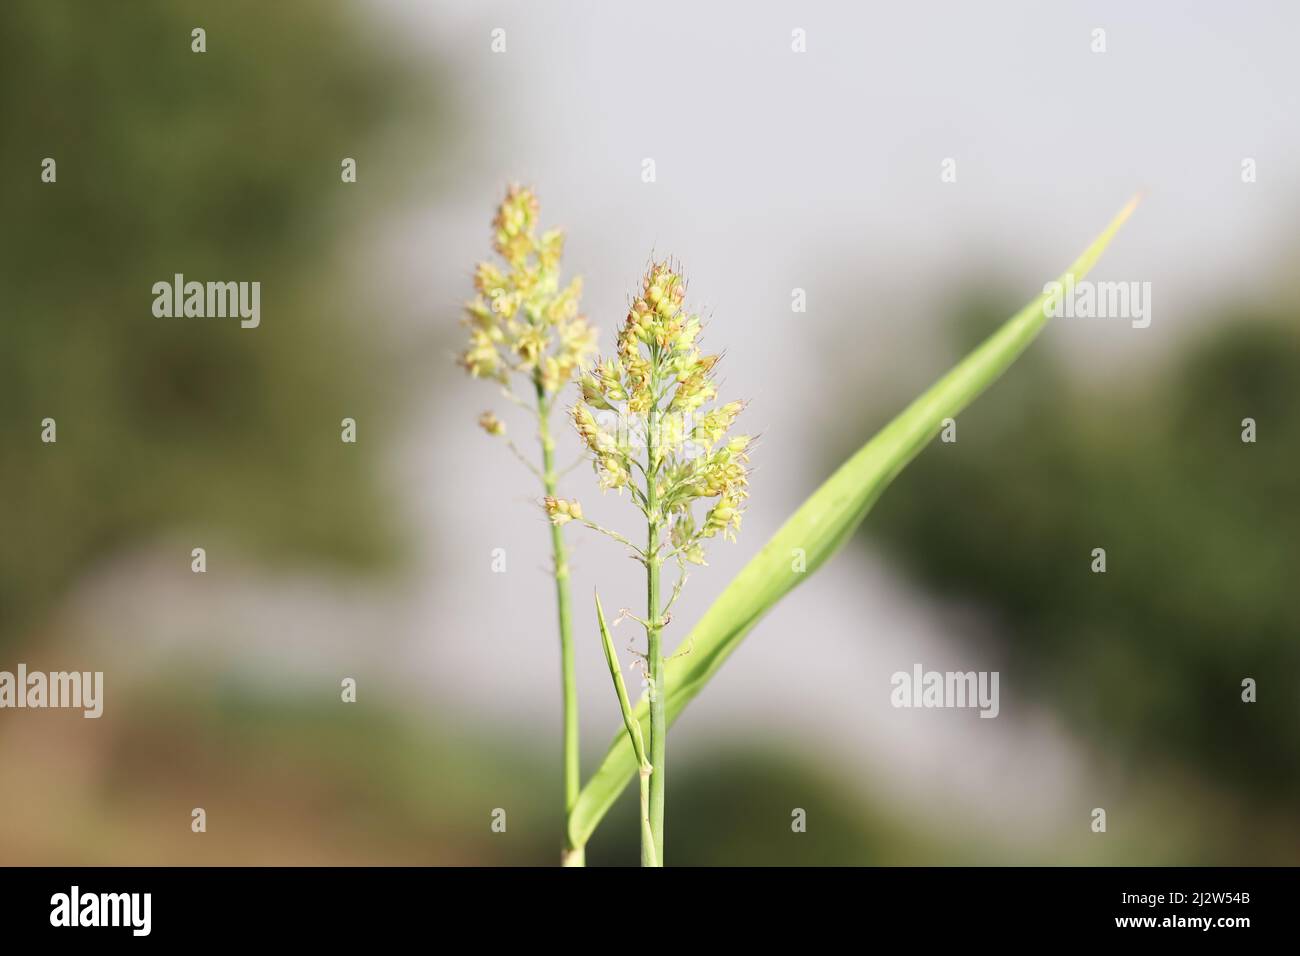 Close-up photo of millet plant growing in the field and millet crop full of seeds Stock Photo